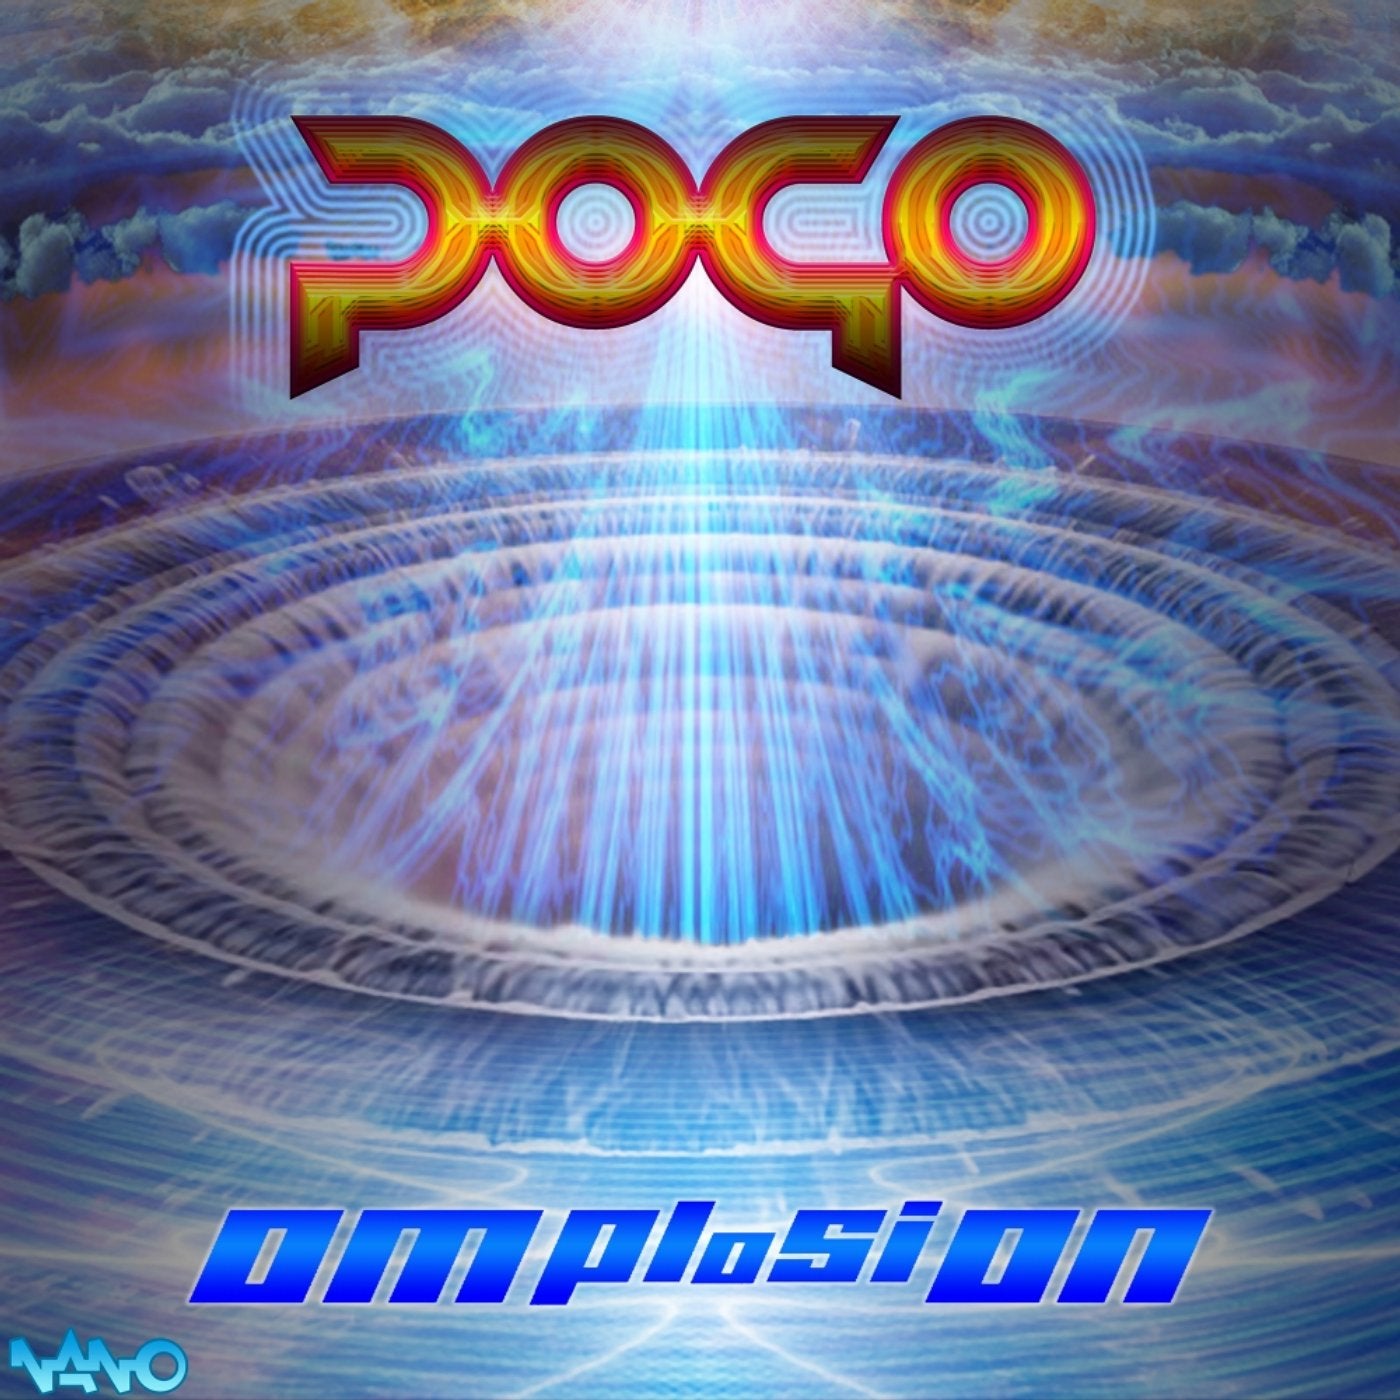 Omplosion